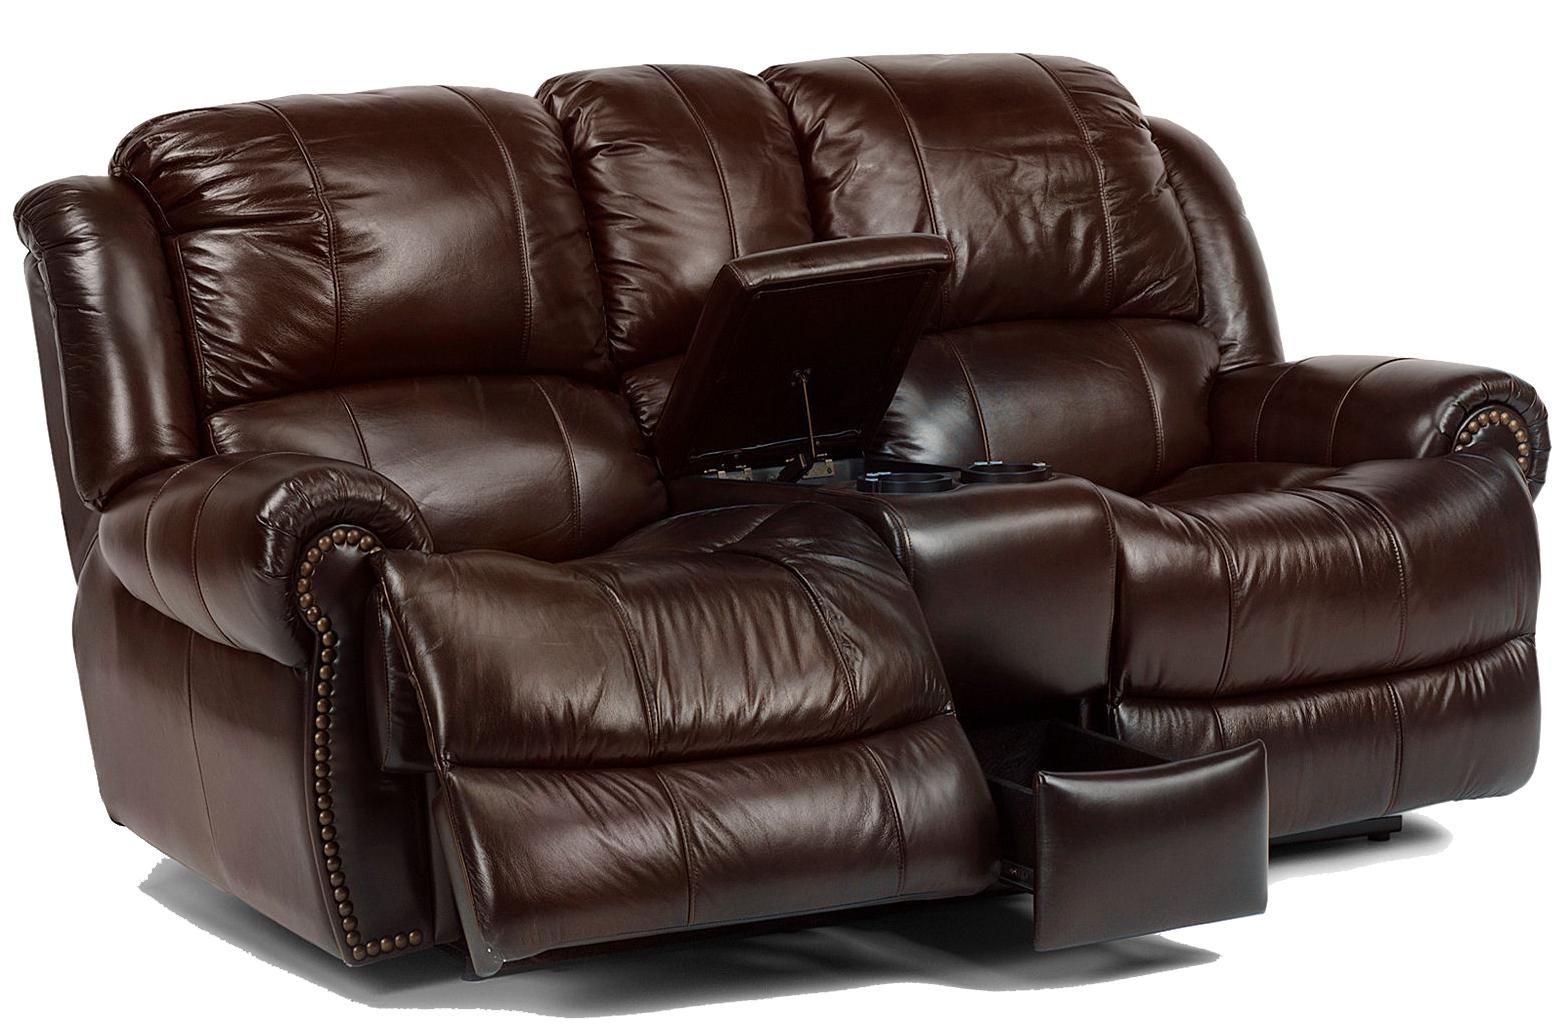 Leather Reclining Sofa With Cup Holders 